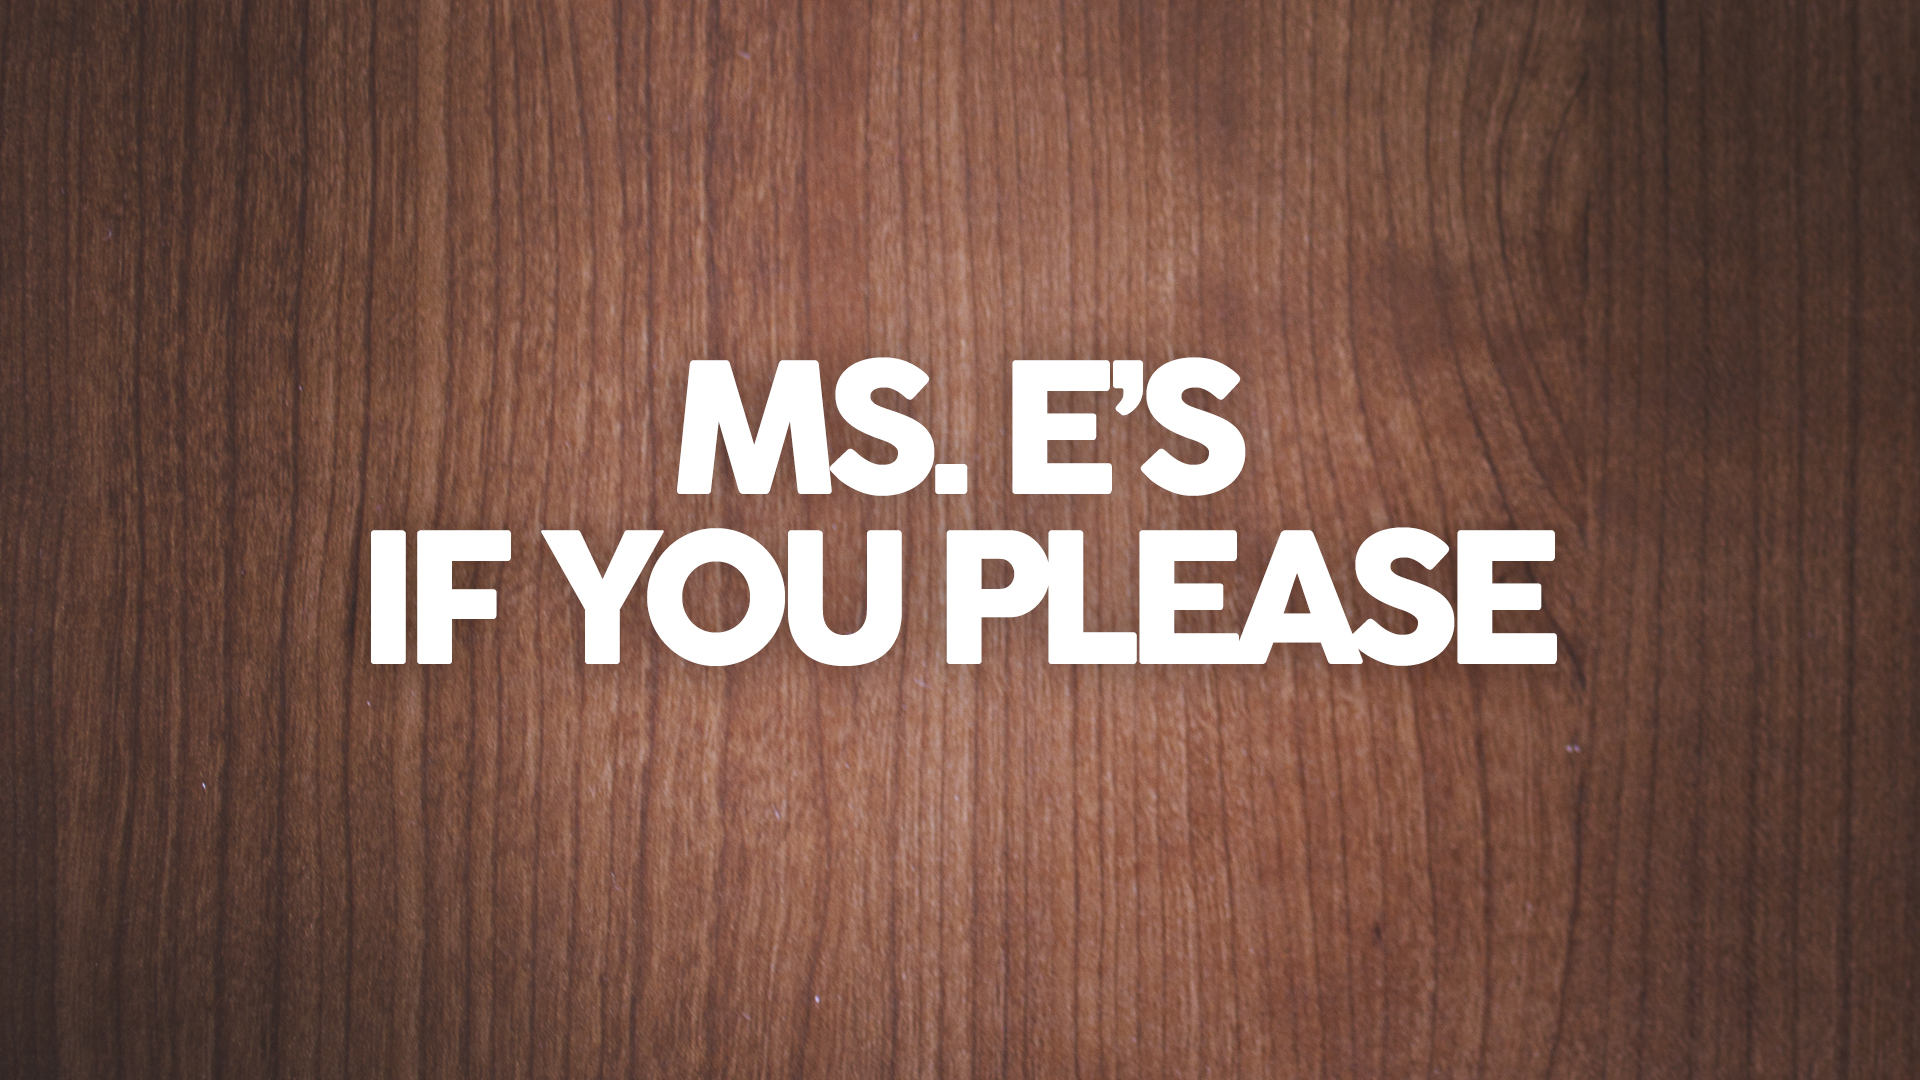 Ms. E’s, If You Please!